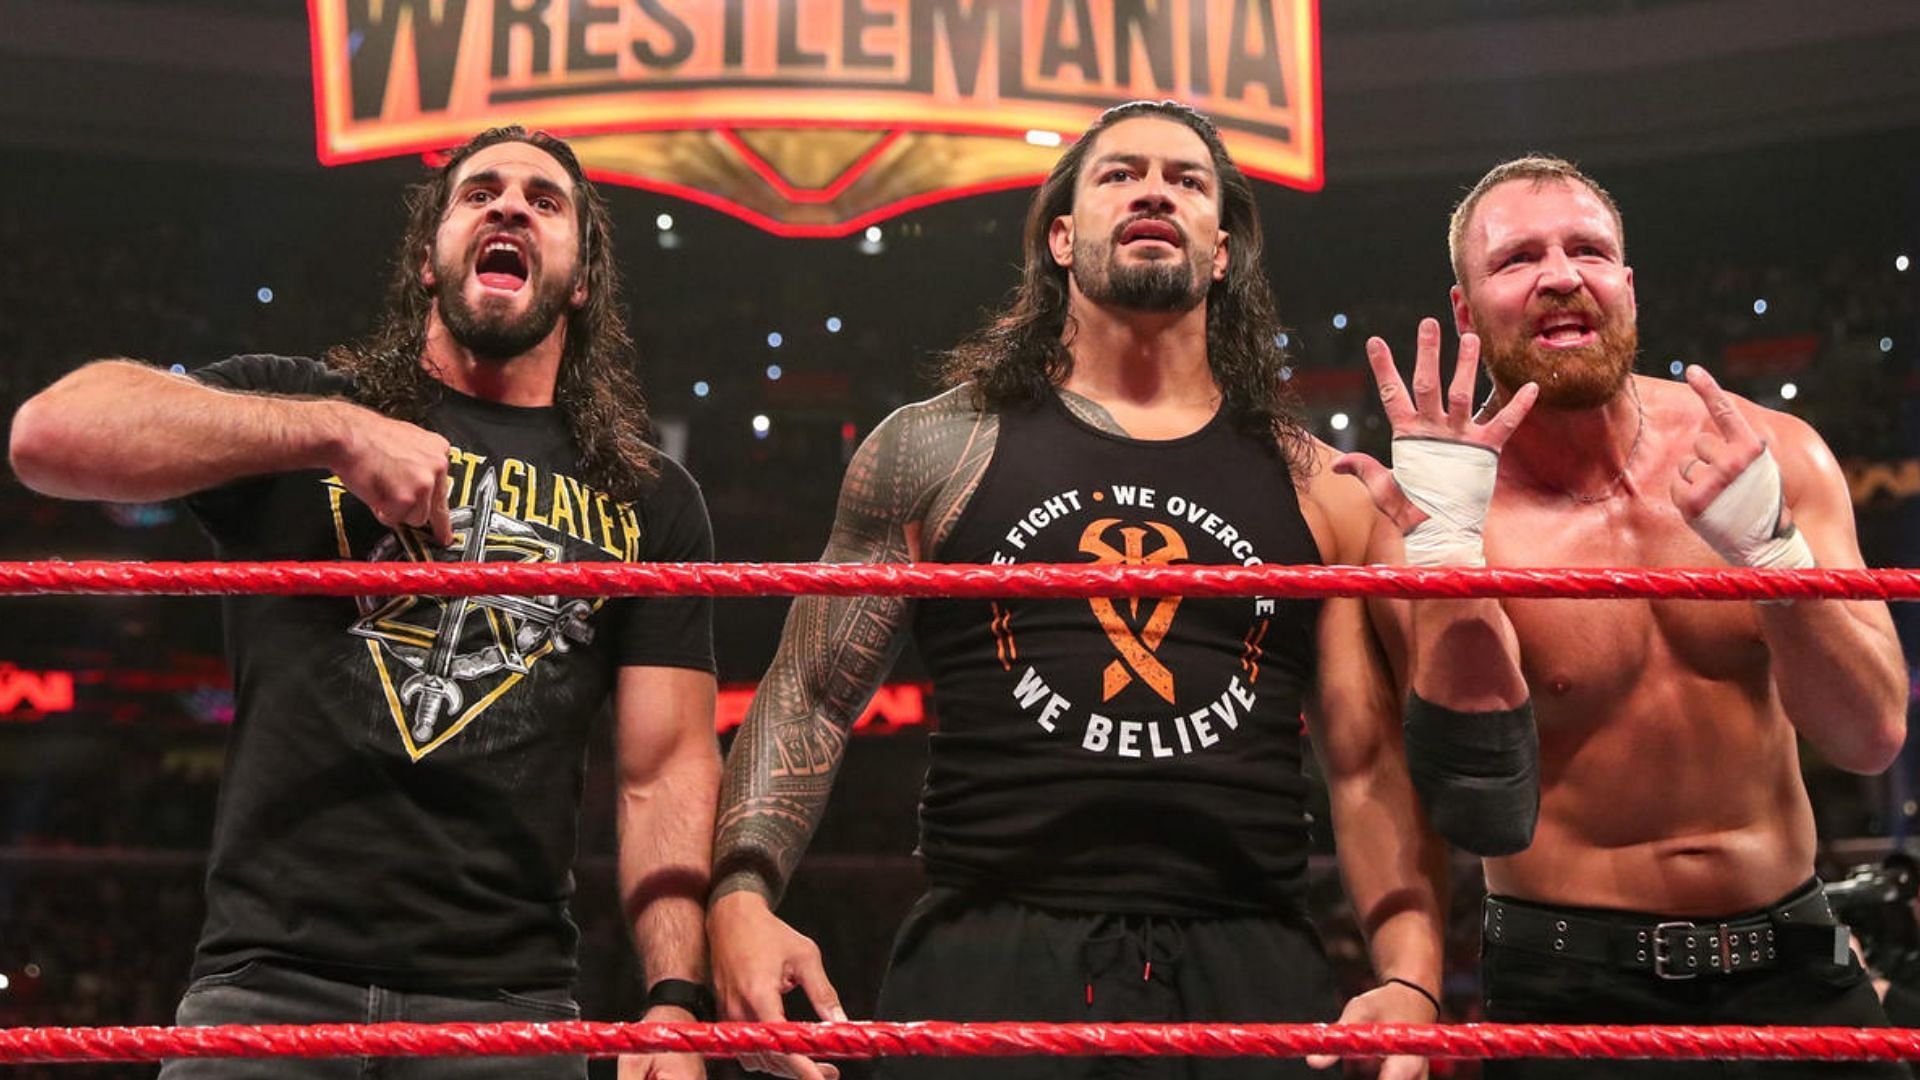 The Shield once held 3 titles on the main roster!